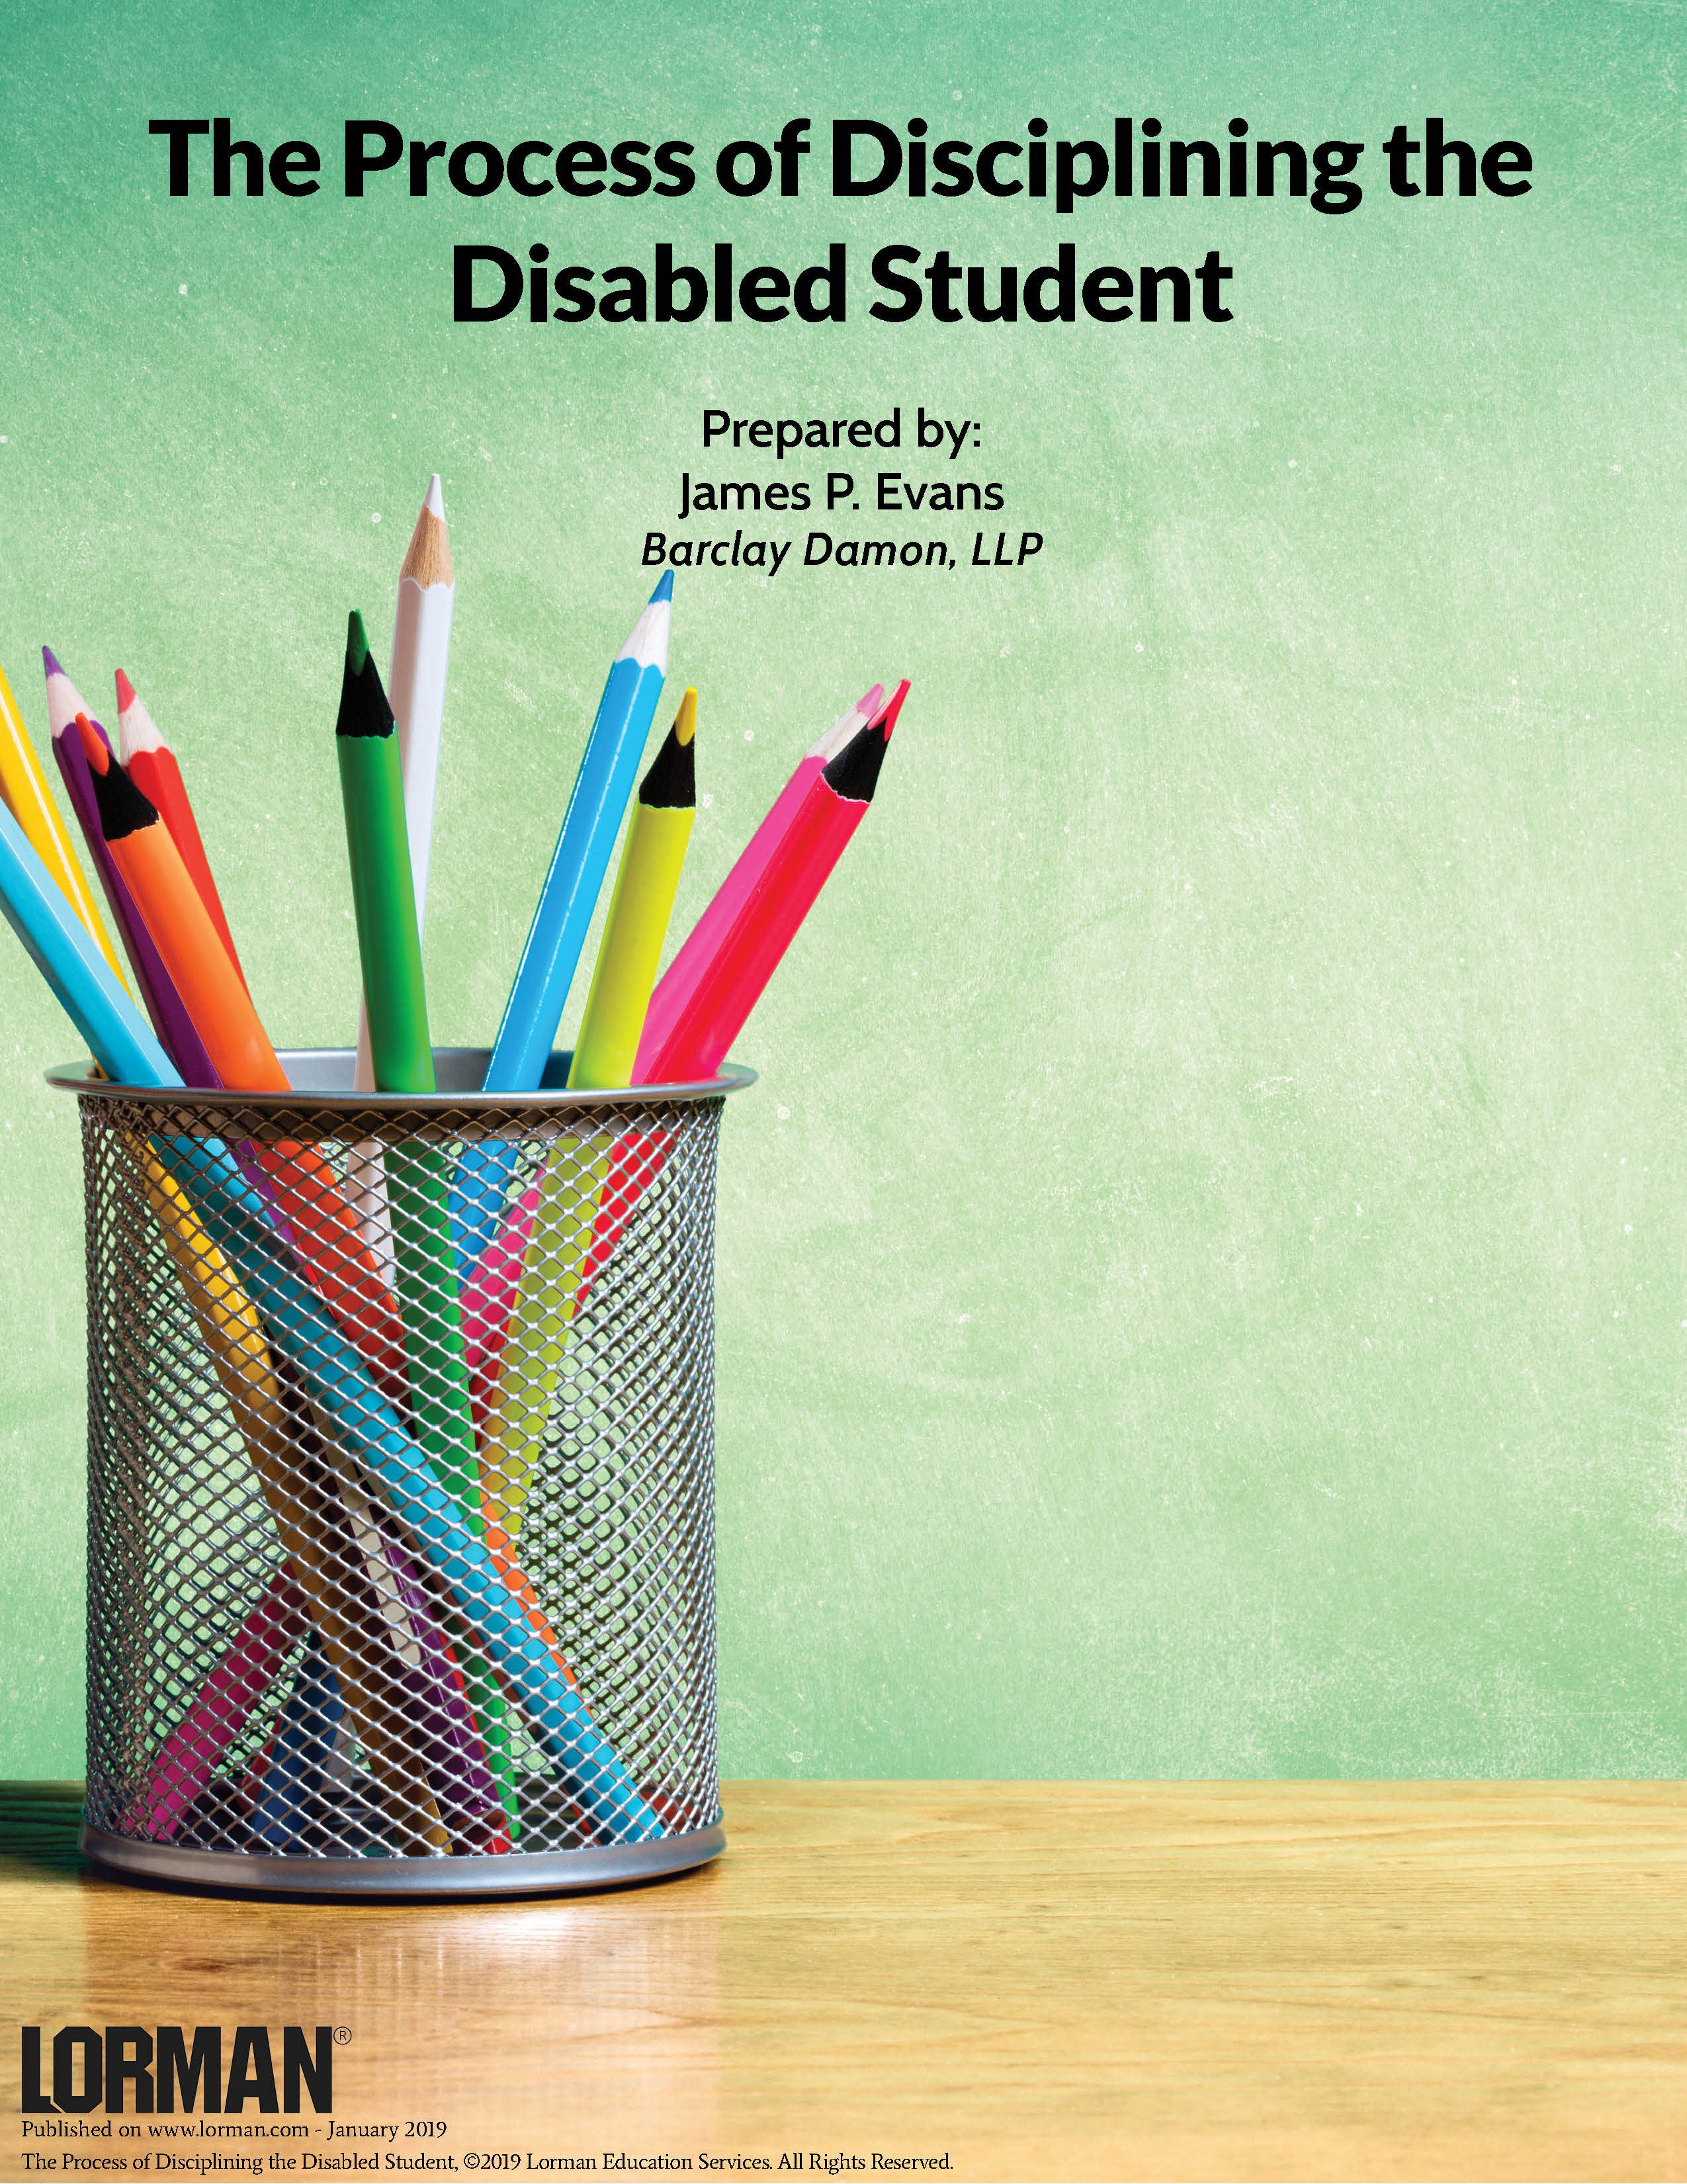 The Process of Disciplining the Disabled Student